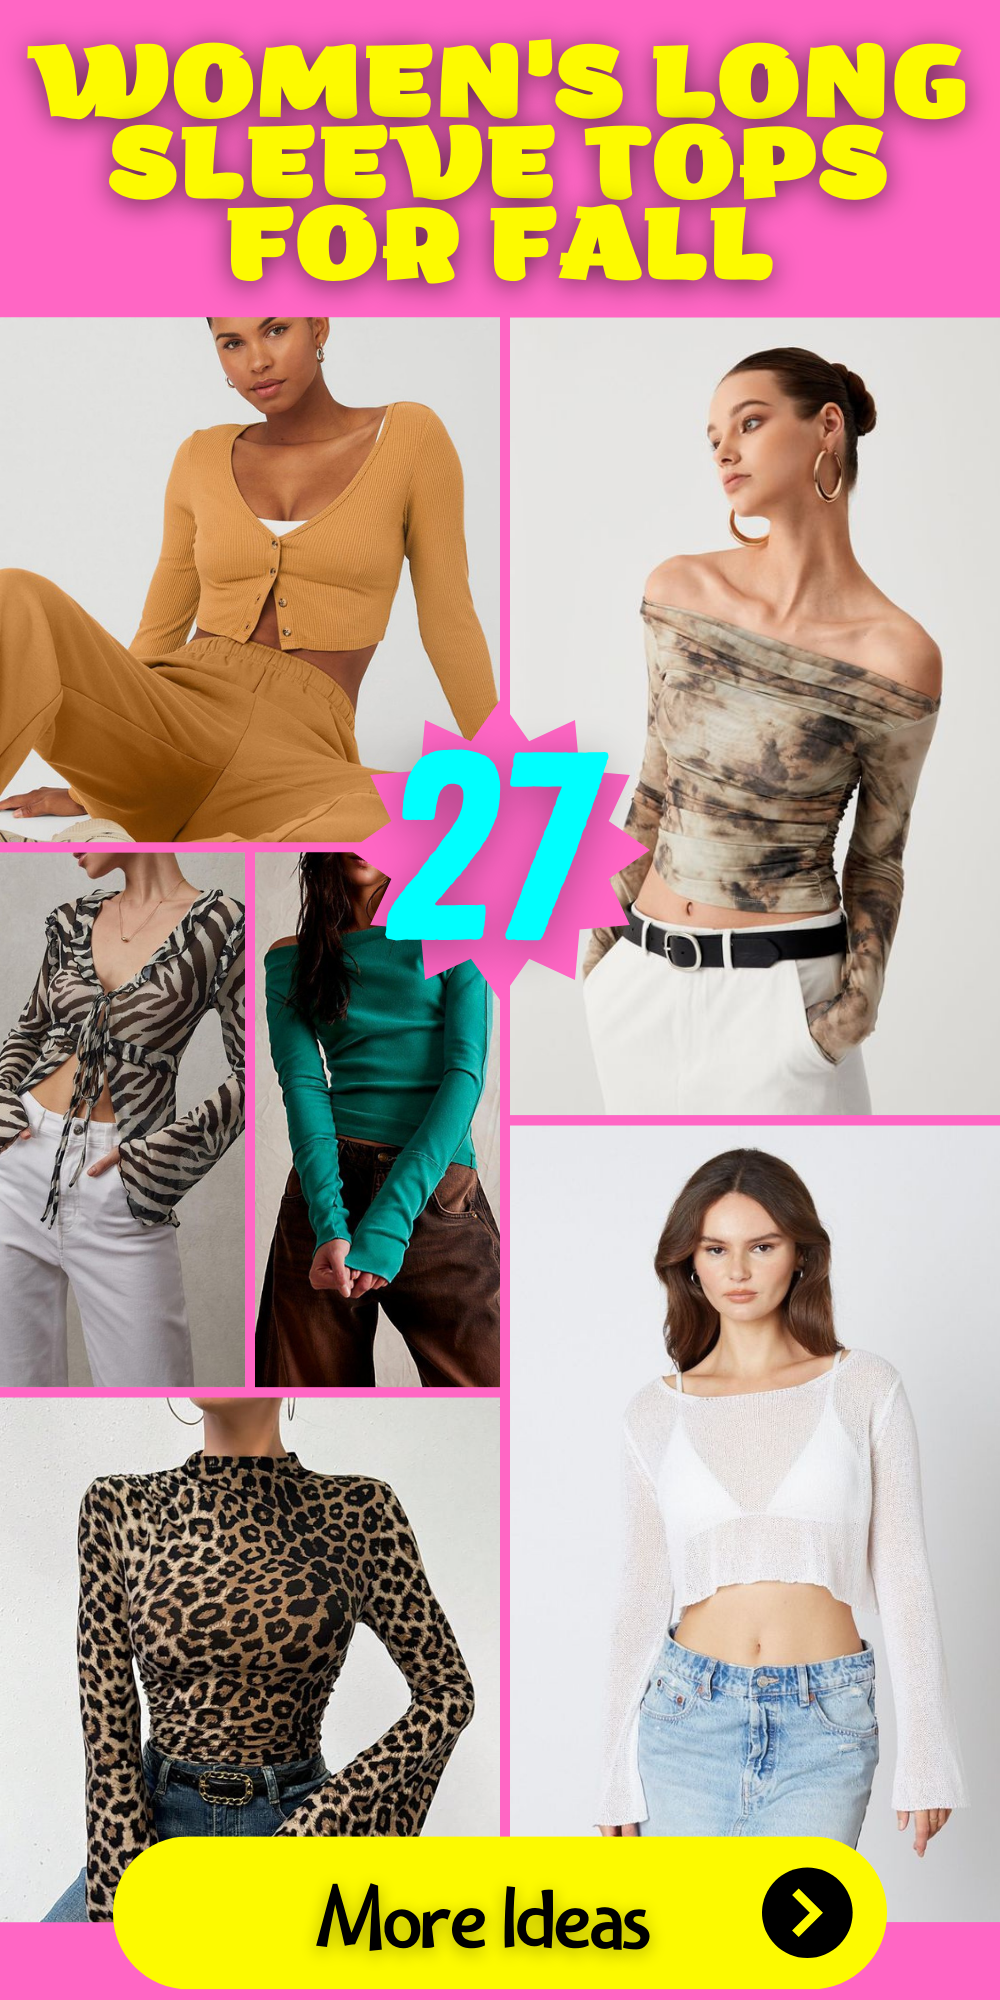 27 Women's Long Sleeve Tops for Fall: Cozy and Fashionable Ideas